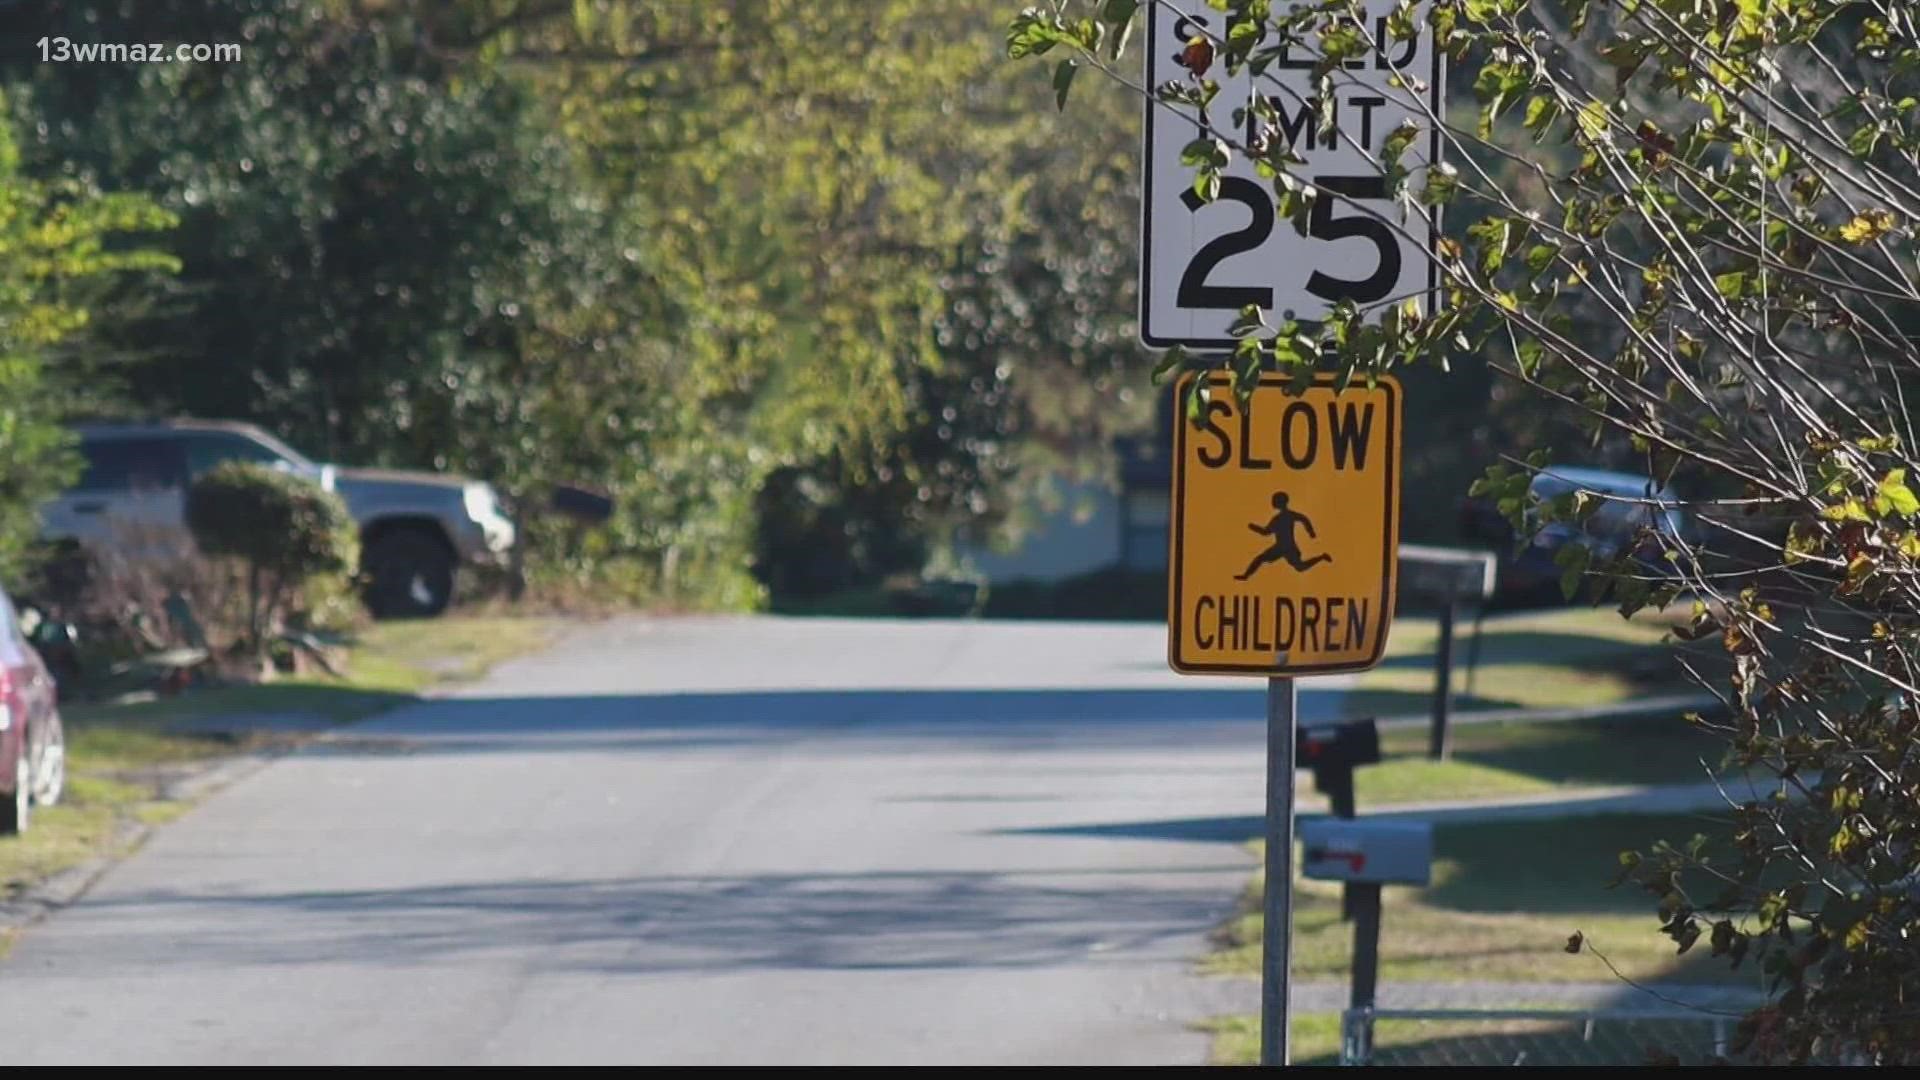 In Macon-Bibb, speeding cameras are the source for tons of violations this fall, but with more citations Come more chances to challenge them.